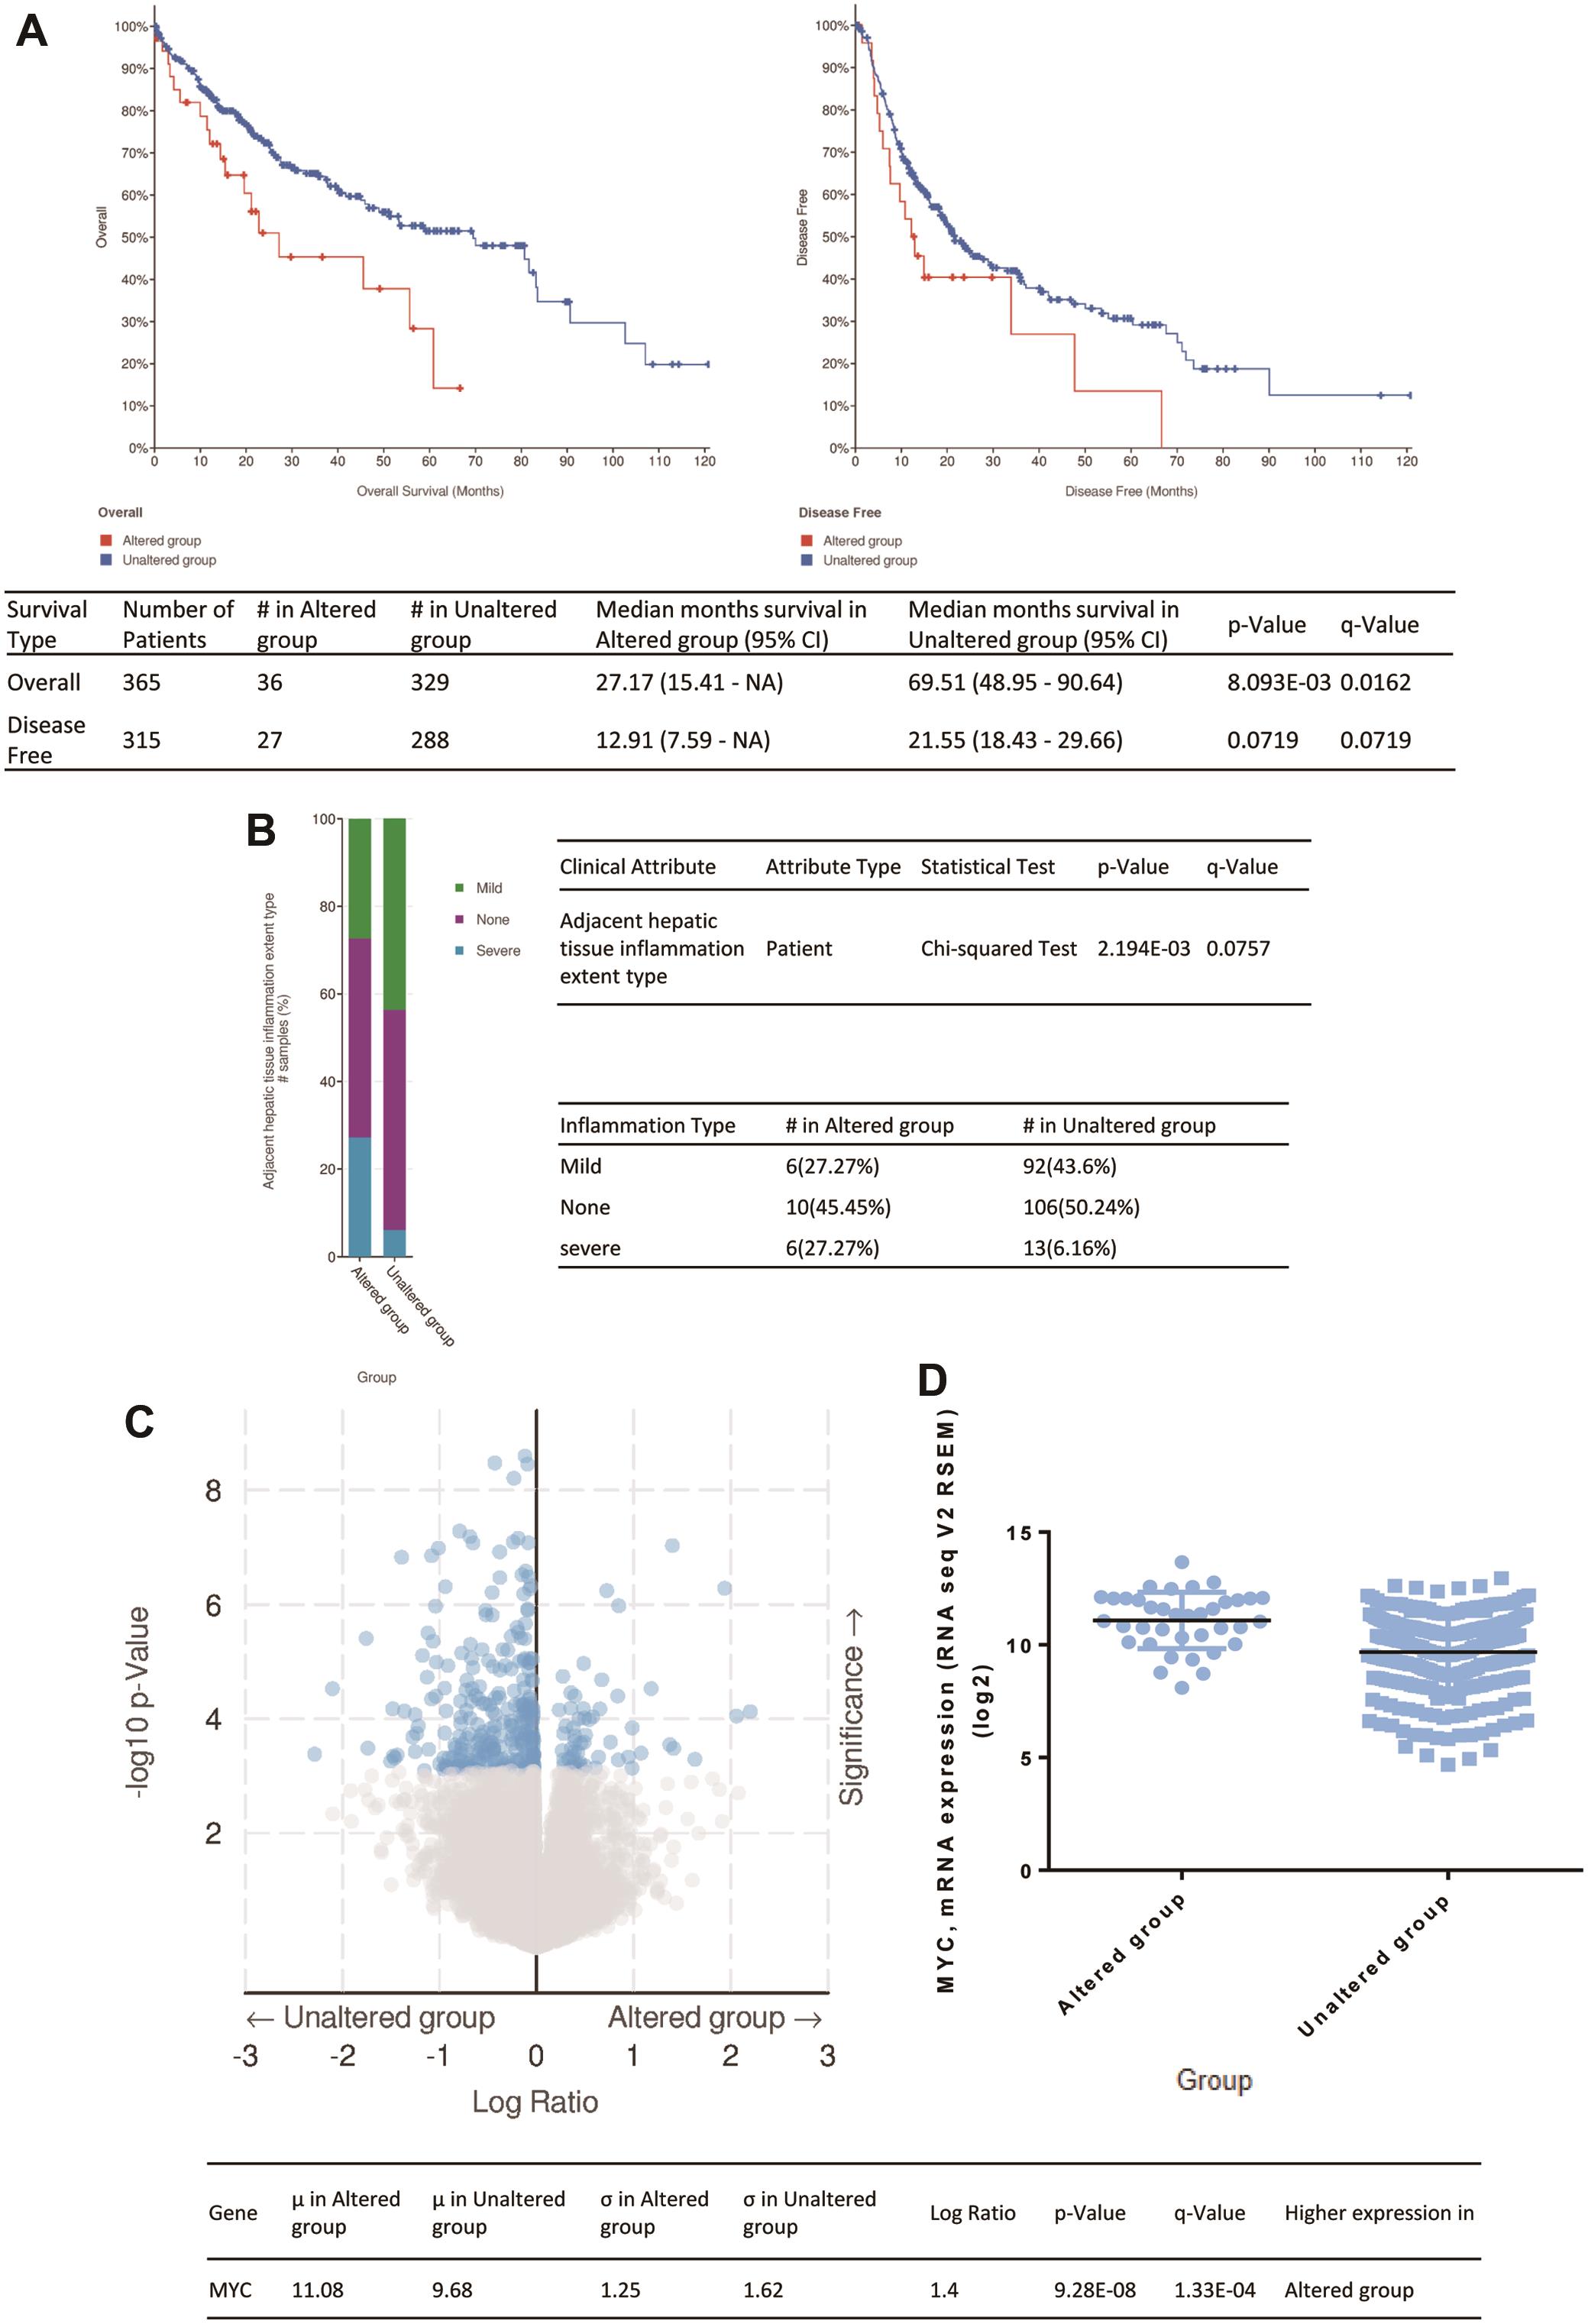 An <italic>ARID1A</italic> mutation was associated with a poorer prognosis in HCC patients.